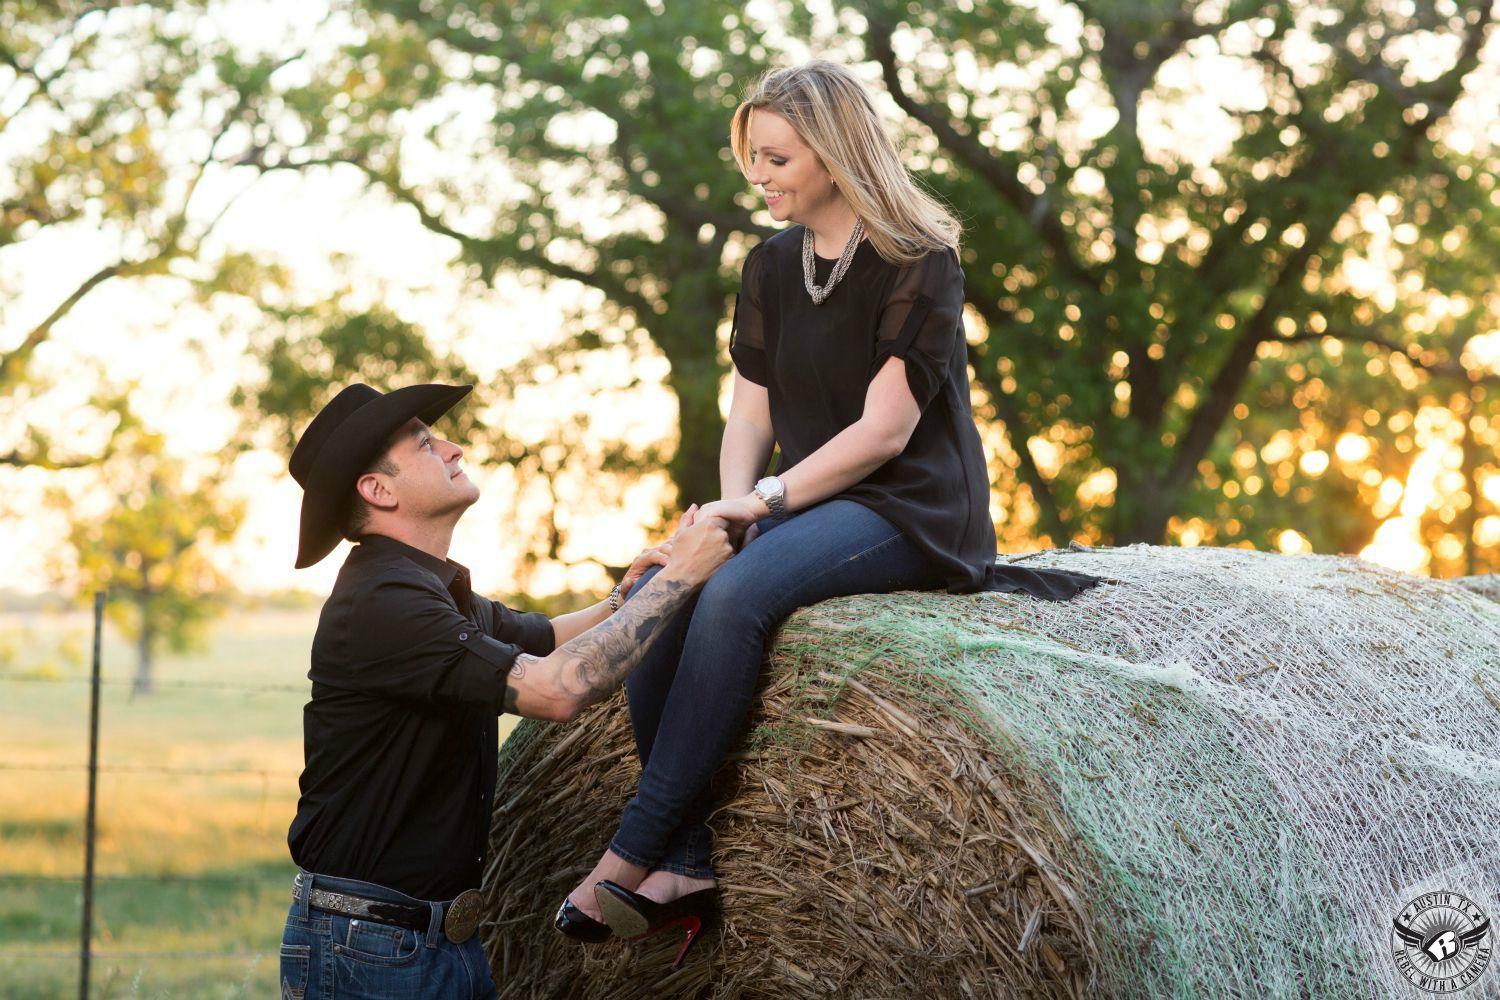 Blond lady in a flowing black blouse with short sleeves, blue jeans and black heals sits on a large round hay bail  holding the hand of a tattooed Latino guy with a black cowboy hat wearing a black dress shirt with rolled up sleeves and blue jeans with a large belt buckle while looking up at the bride with a large warm glow in the background from the sunset through trees in this dreamy engagement portrait in Georgetown Texas in rural Austin. 